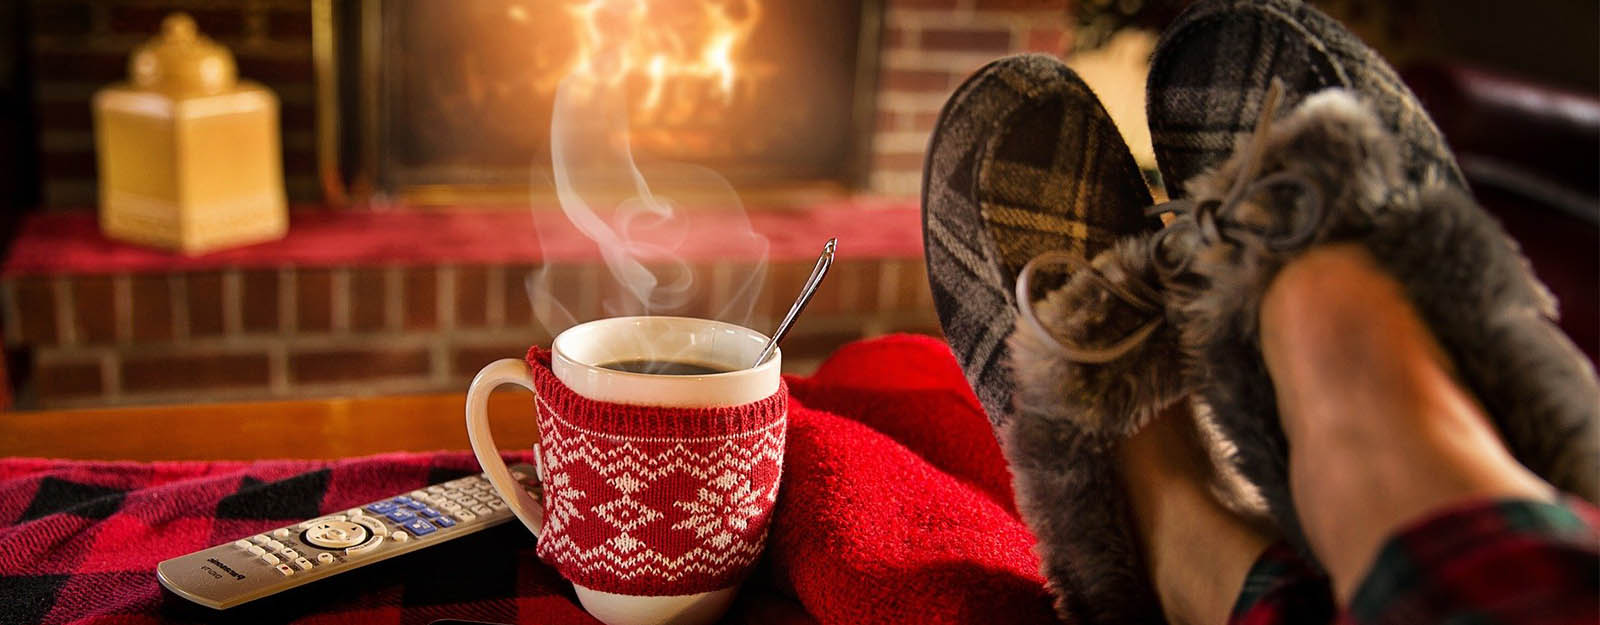 A pair of feet in slippers propped up beside a steaming mug of hot chocolate in front of a fire place.